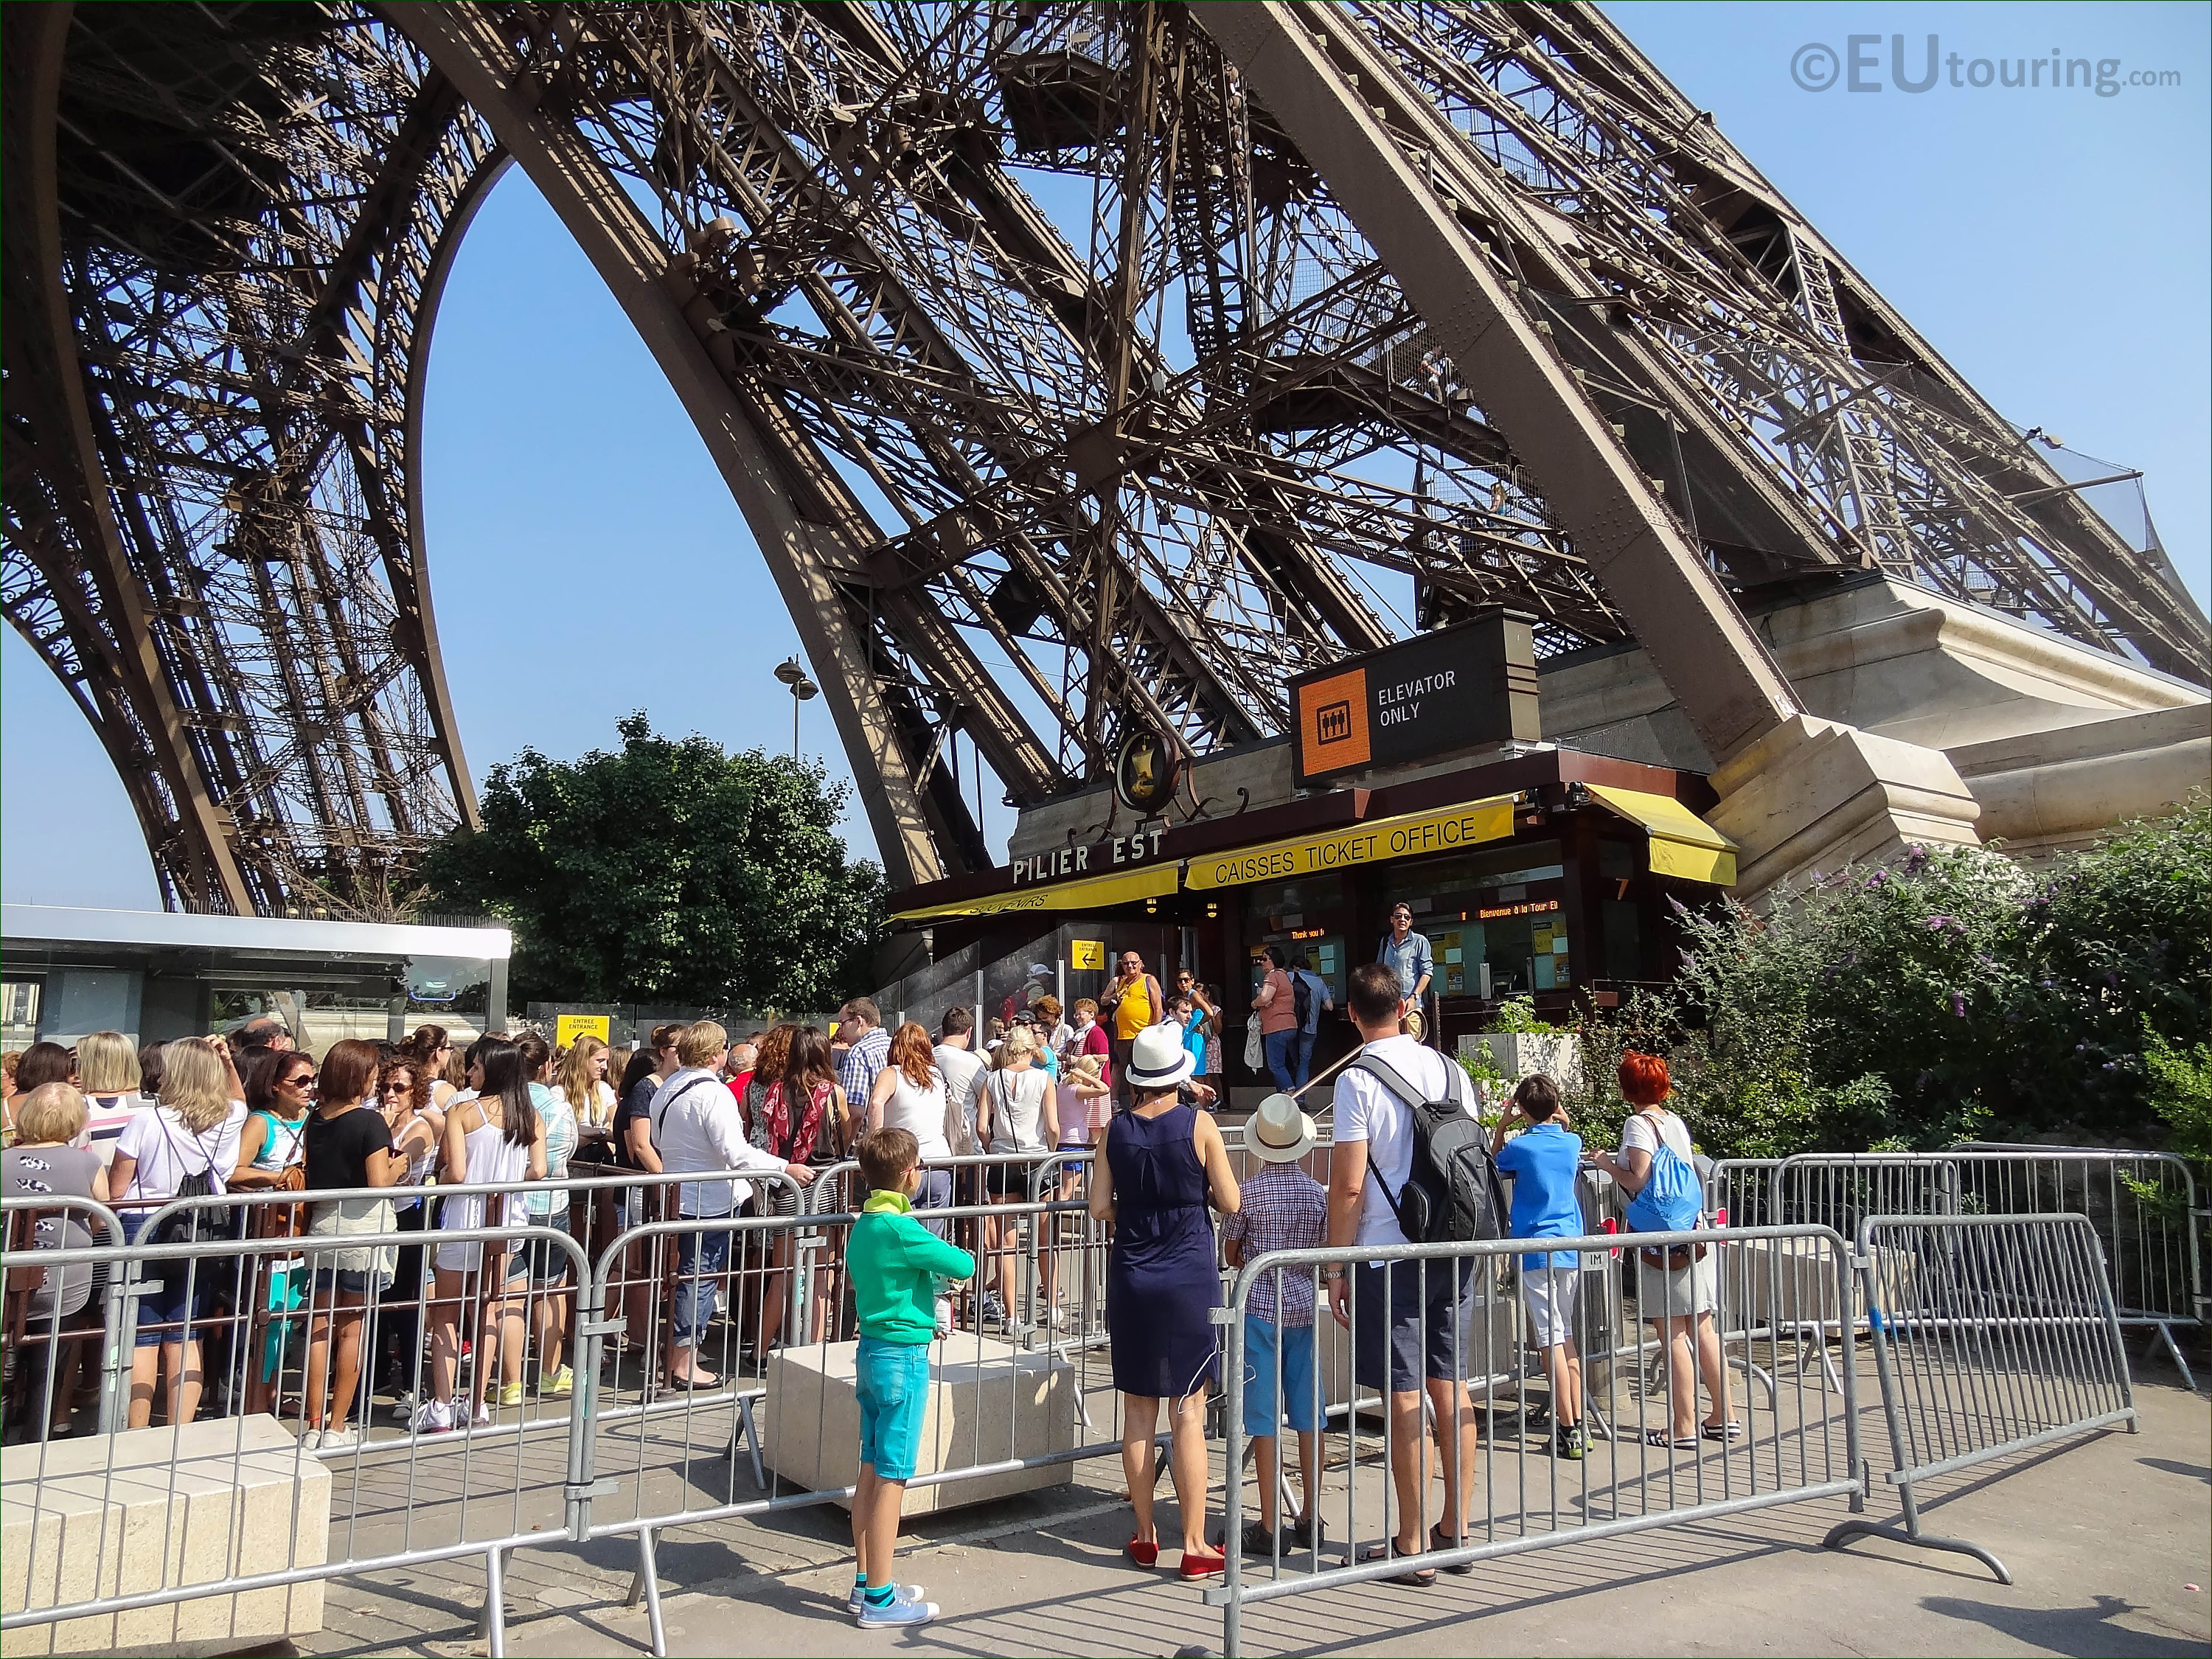 High definition photographs of the Eiffel Tower in Paris - Page 1